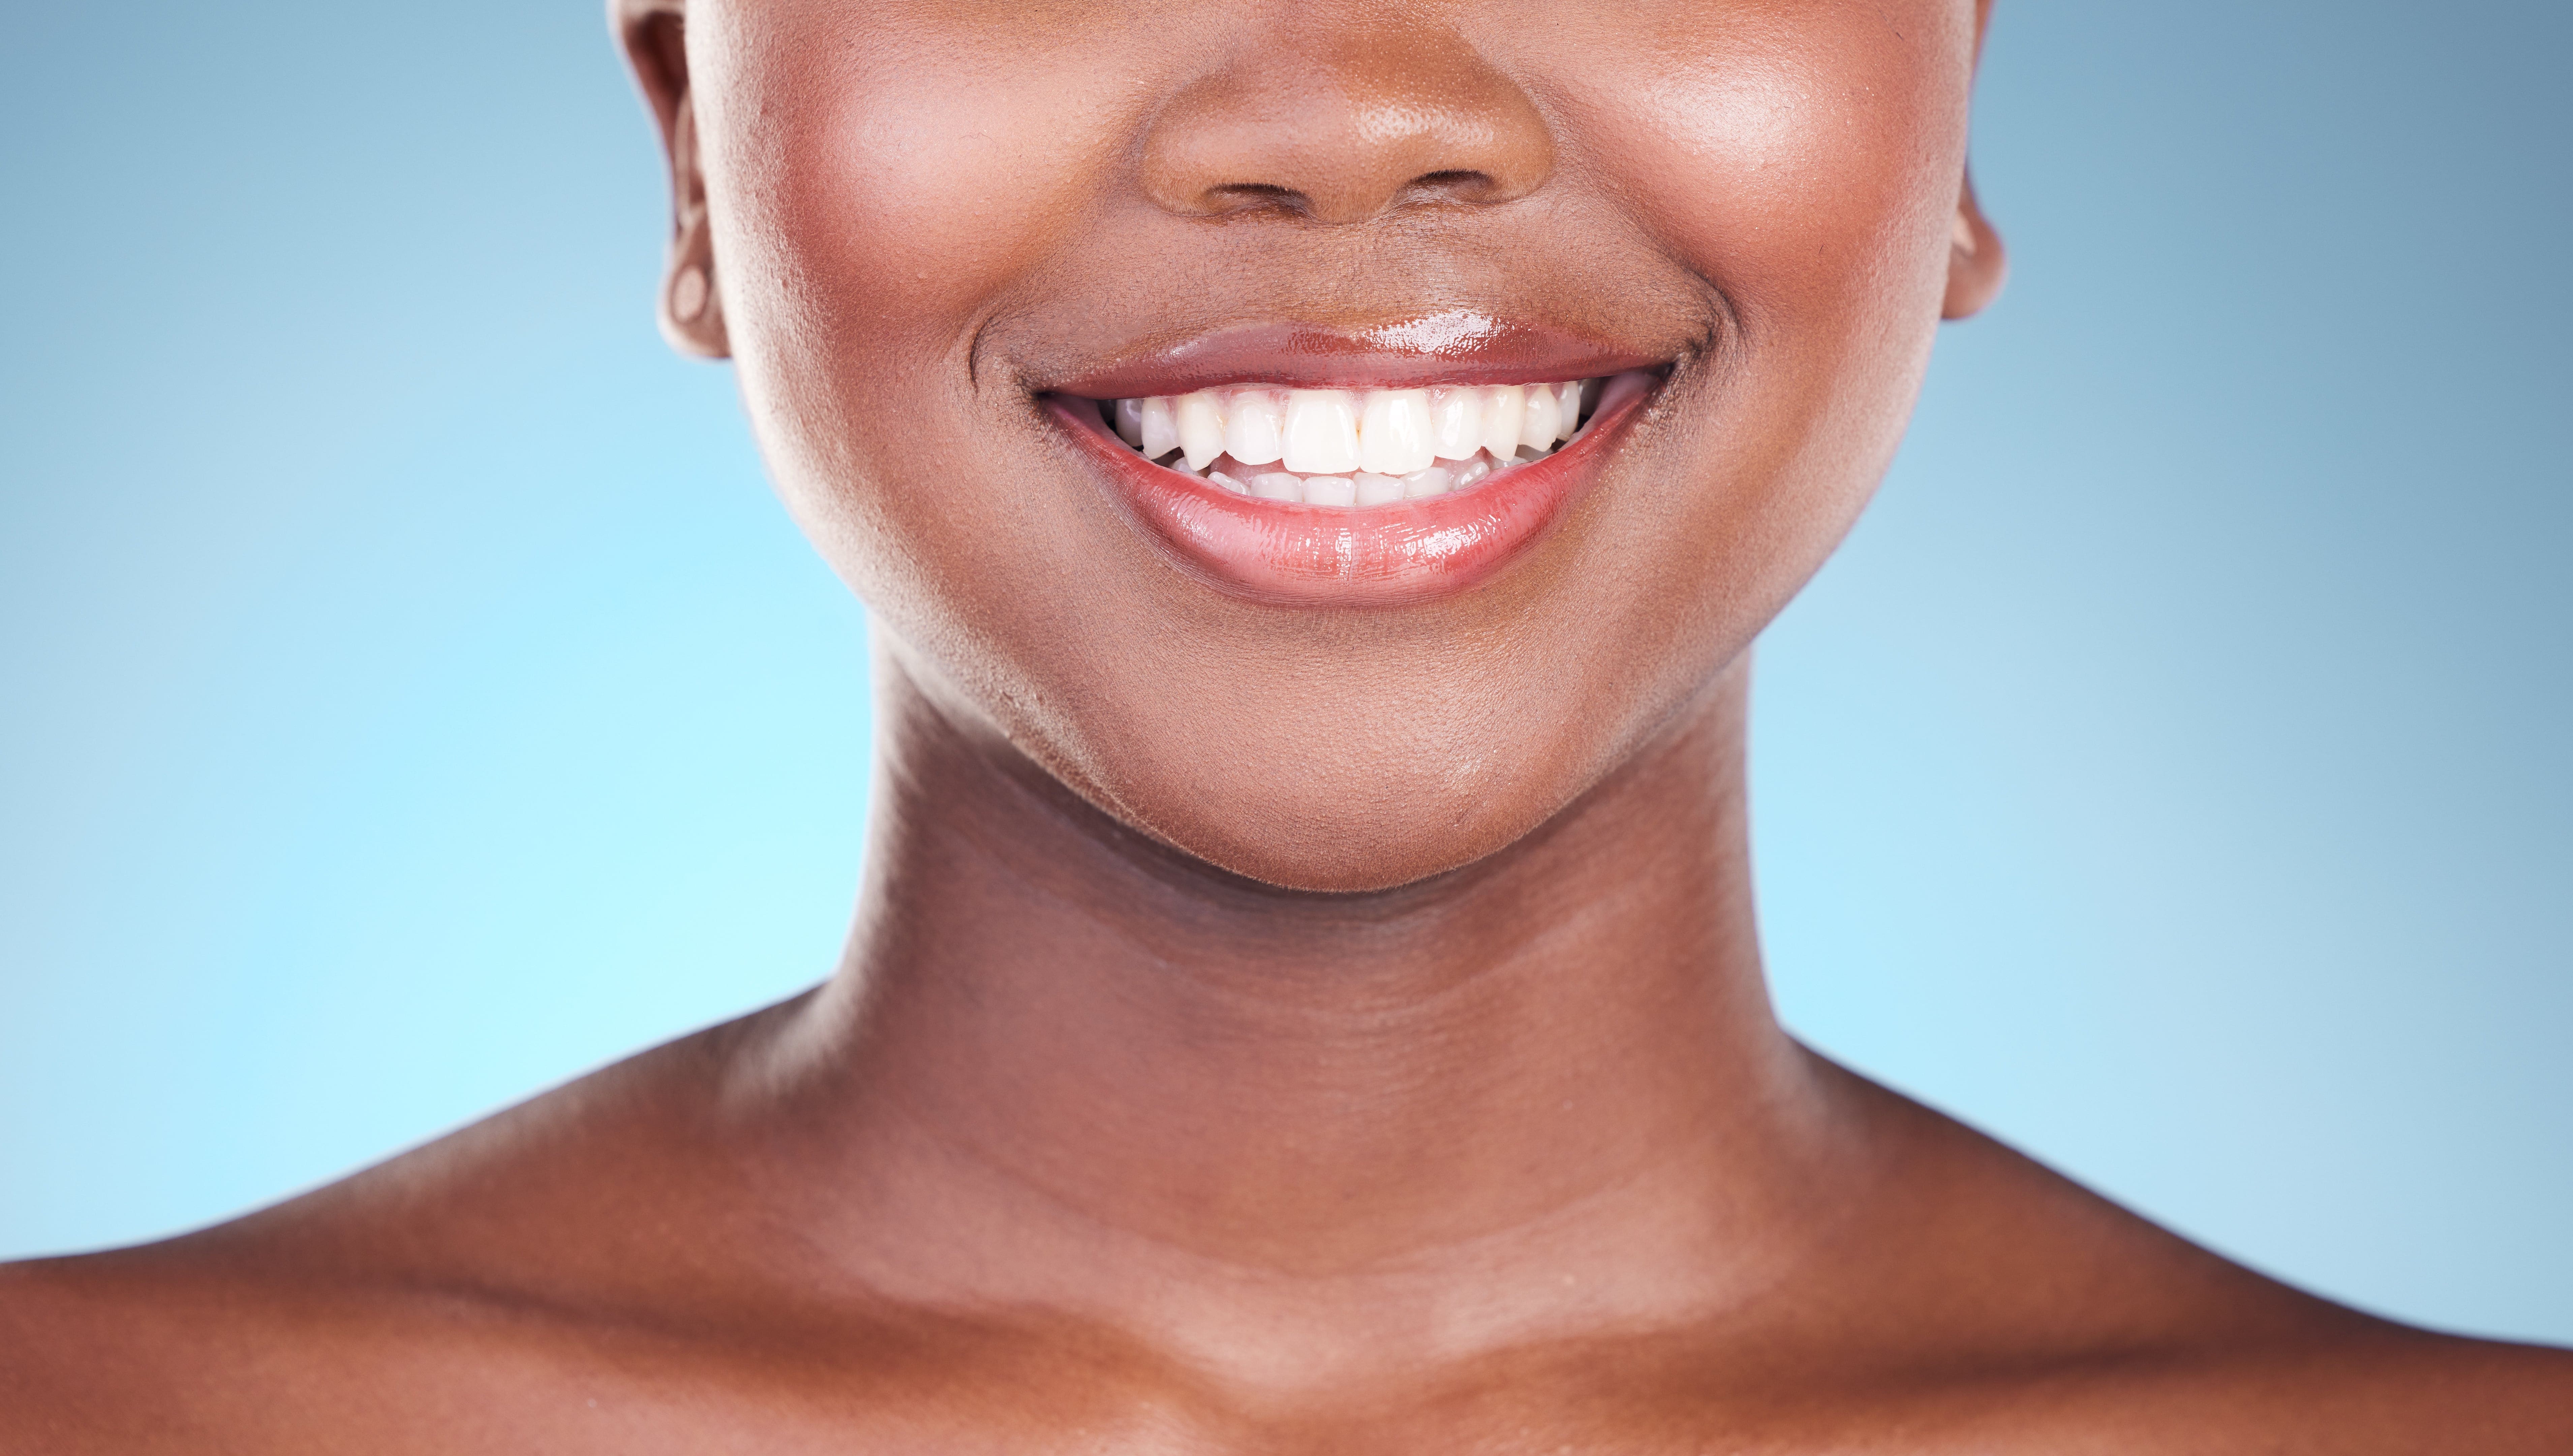 woman-teeth-and-smile-in-dental-care-hygiene